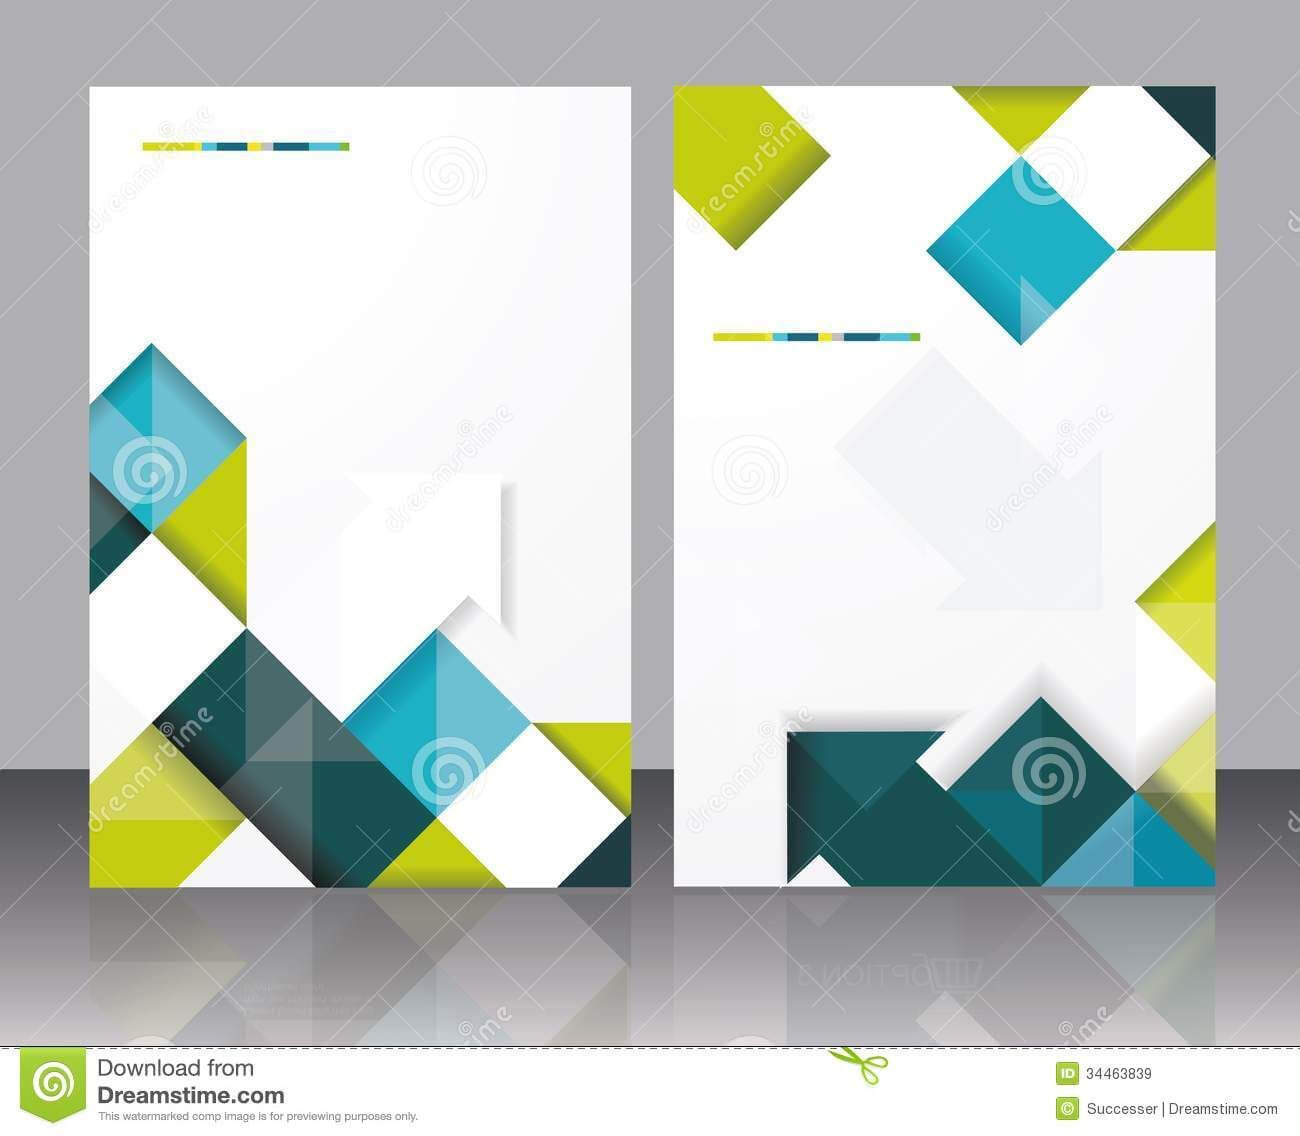 Brochure Template Design Royalty Free Stock Photos – Image Throughout Free Illustrator Brochure Templates Download